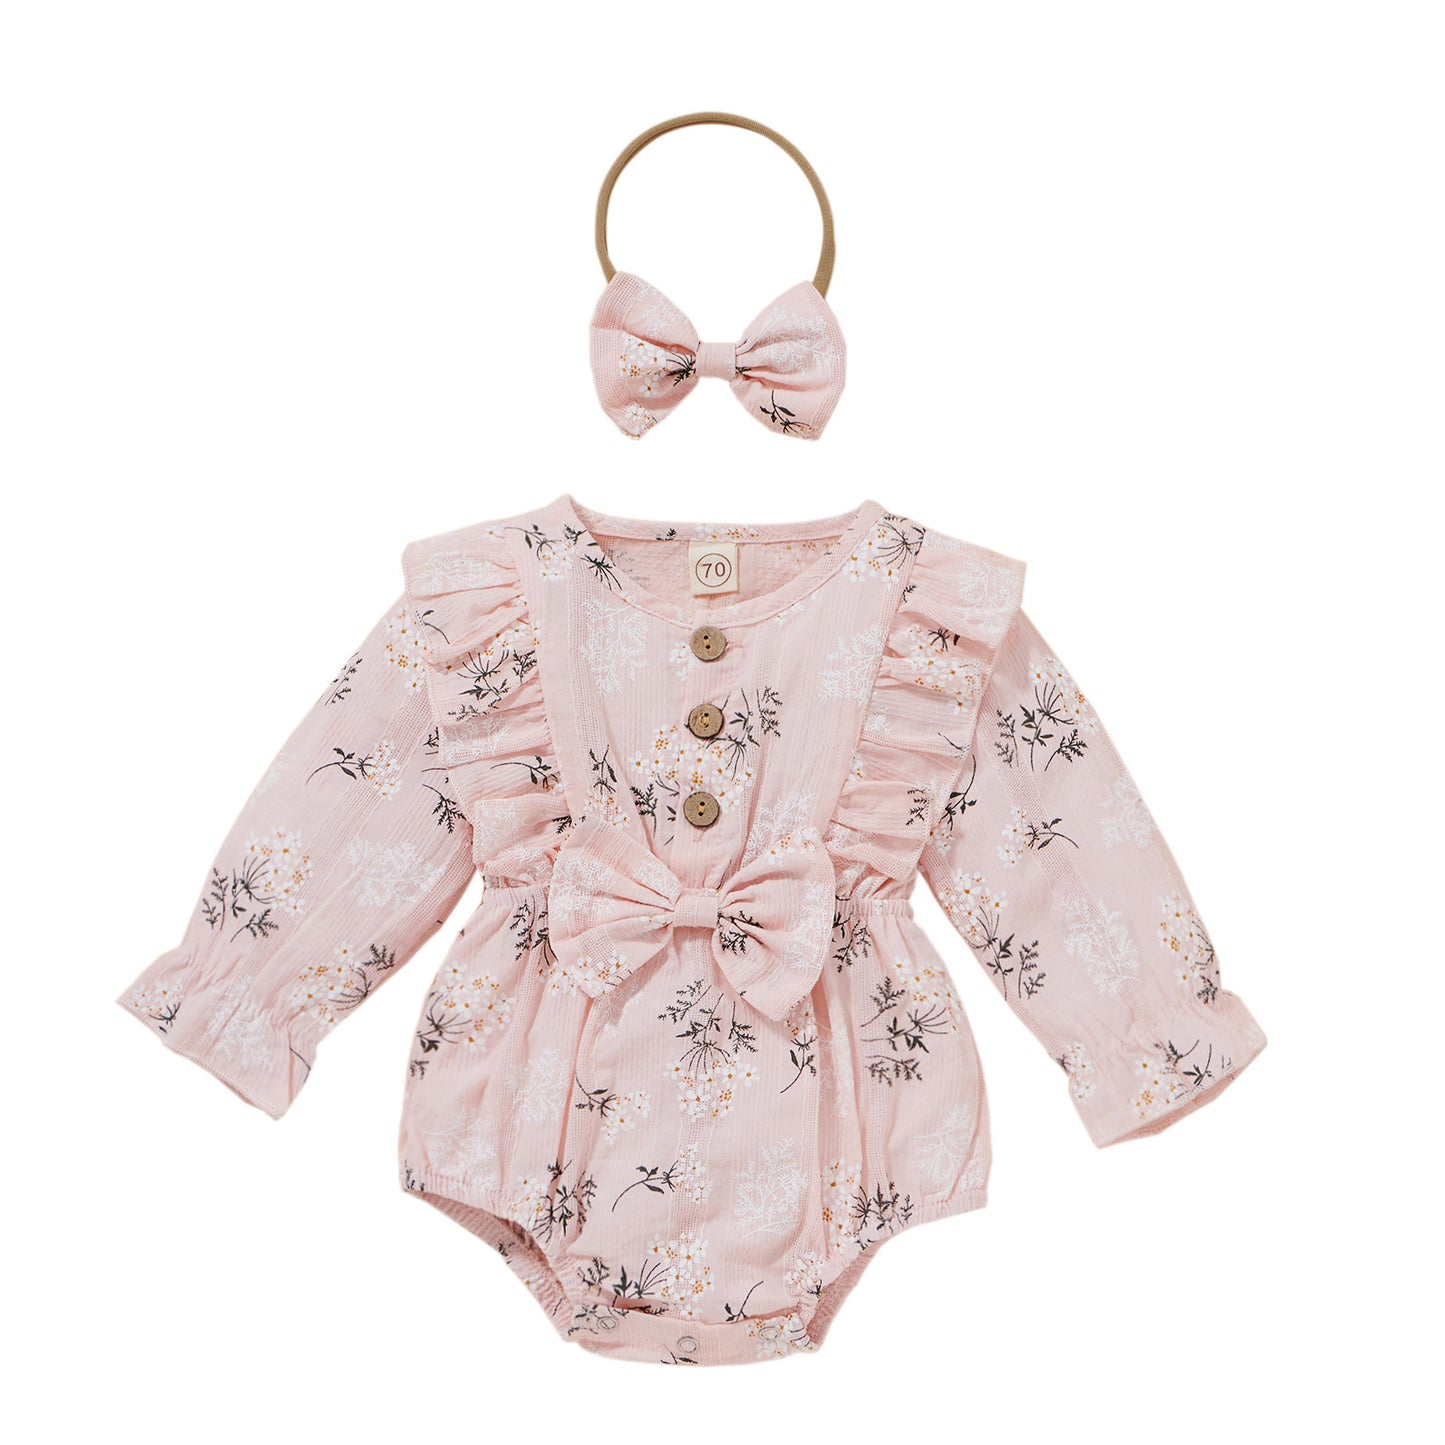 Baby Girl Cotton Floral Romper with Headband - different colors available